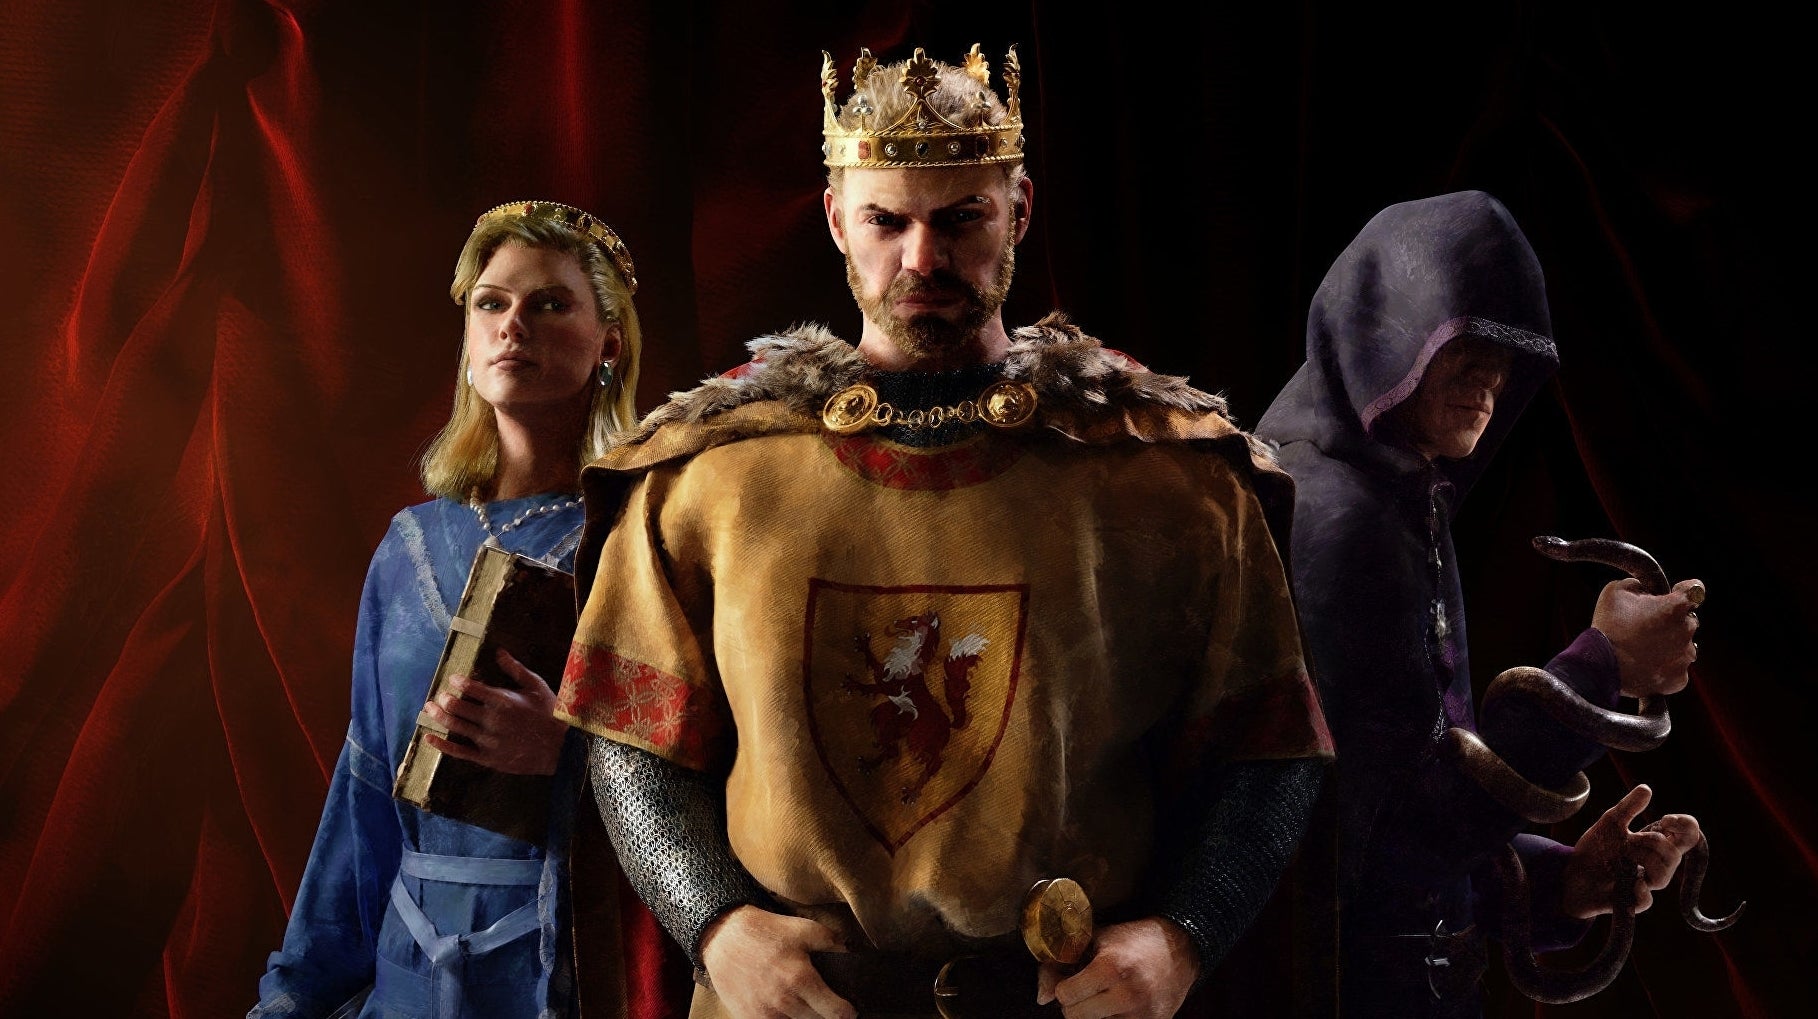 Image for Looks like Crusader Kings 3 could be on its way to consoles